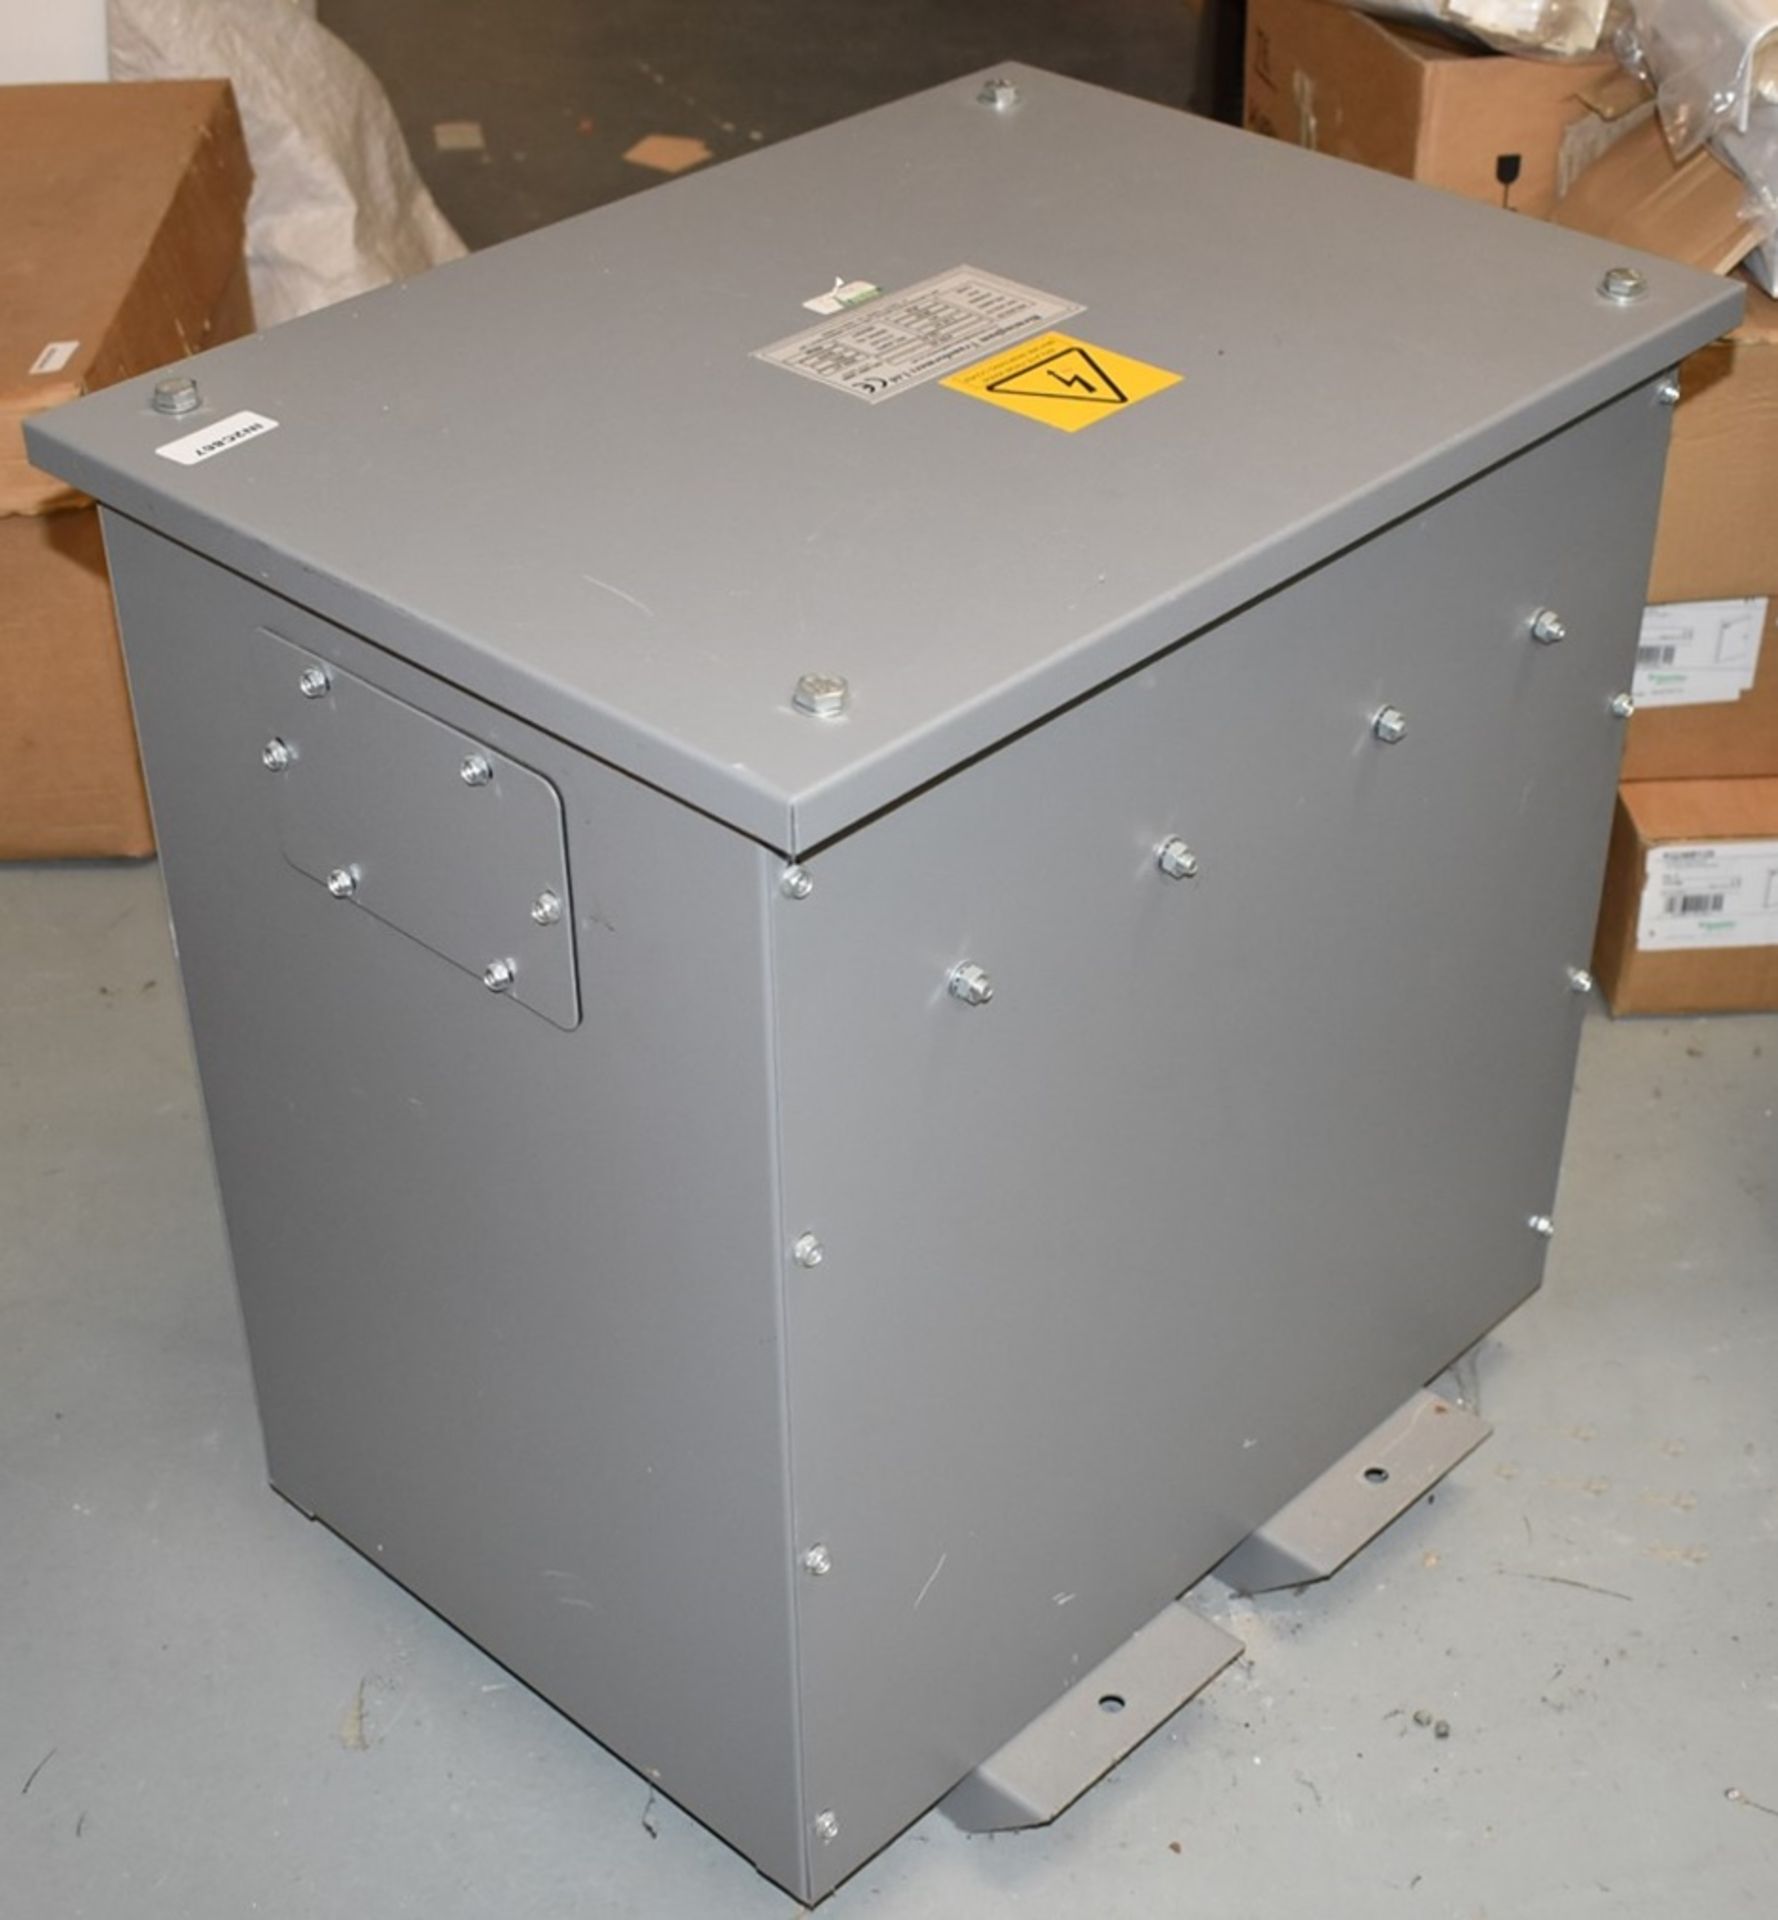 1 x Industrial 3 Phase Site Transformer With Six Outlets, Steel Enclosure & Integrated Fork Pockets - Image 7 of 7